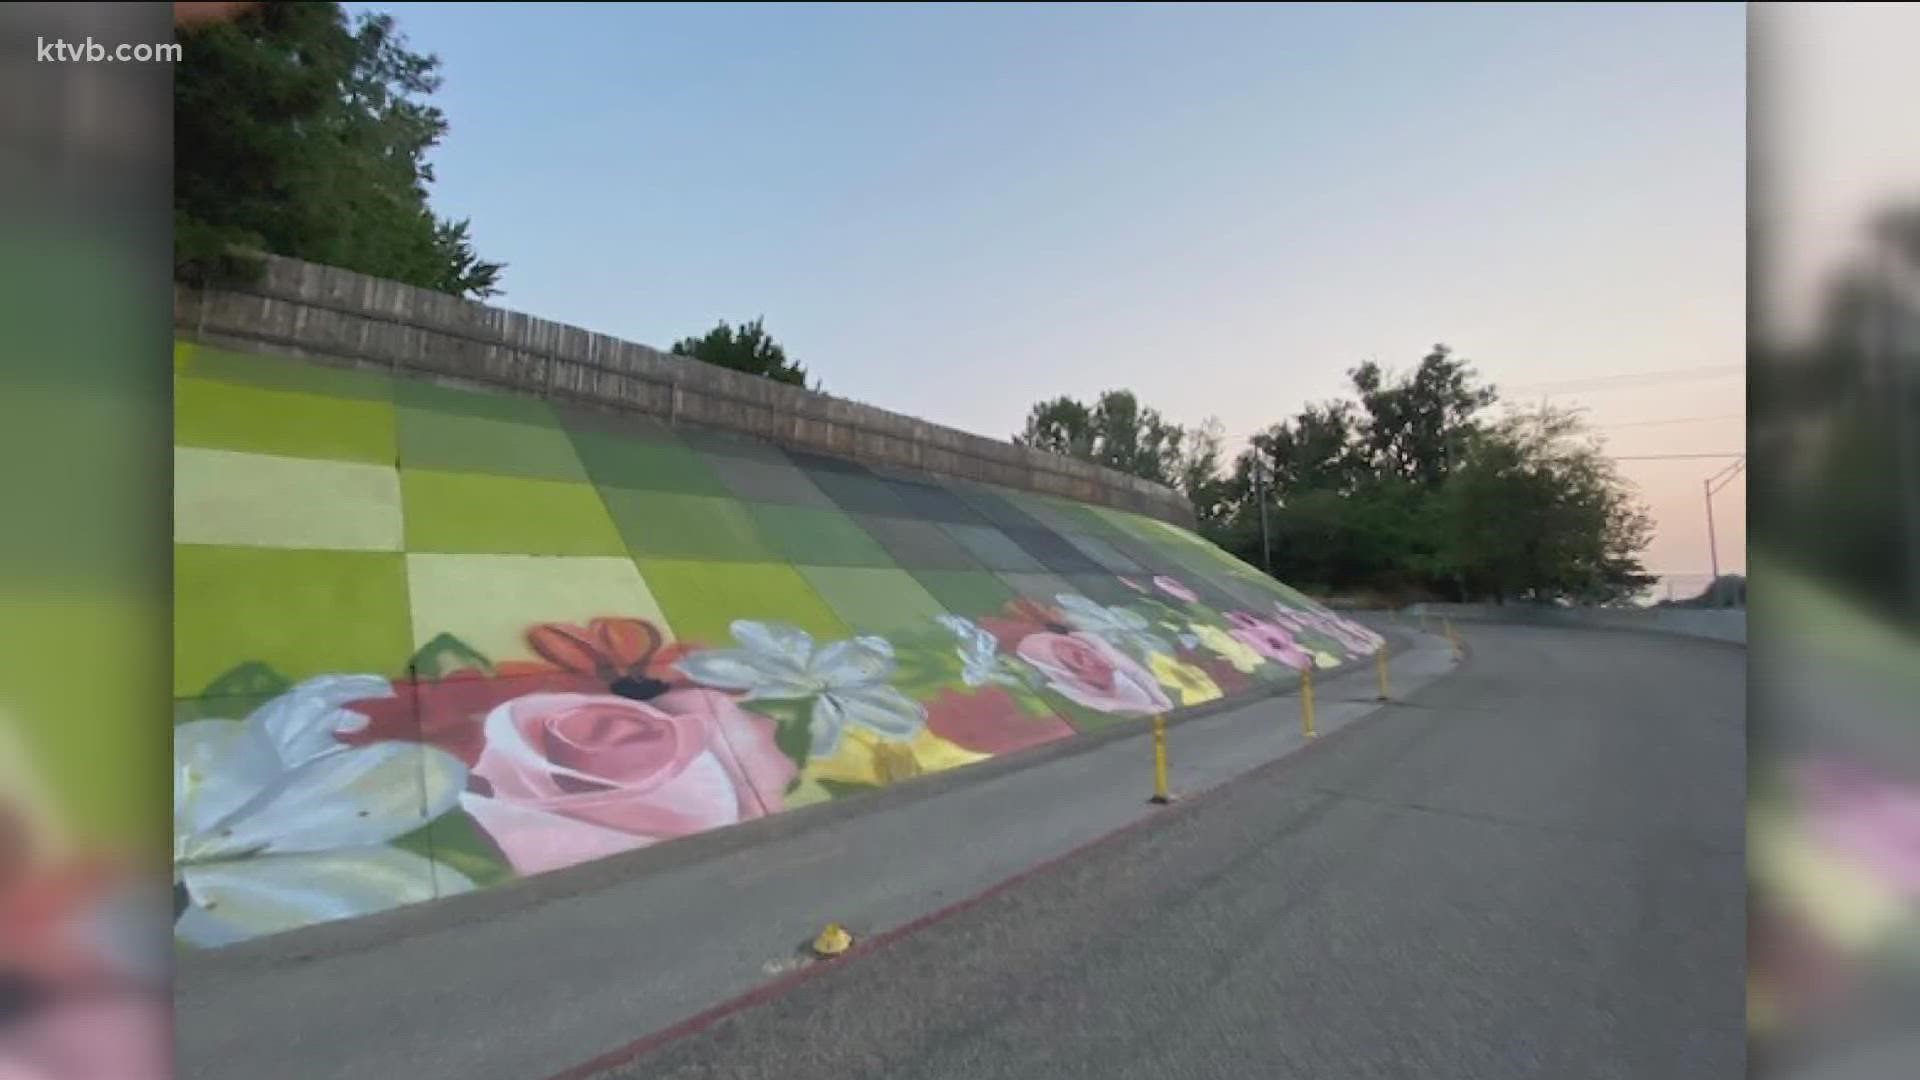 Thousands of people drive on the Boise Connector every day, which is why Alex Fascilla and others in the community wanted to paint a mural on a large wall near it.